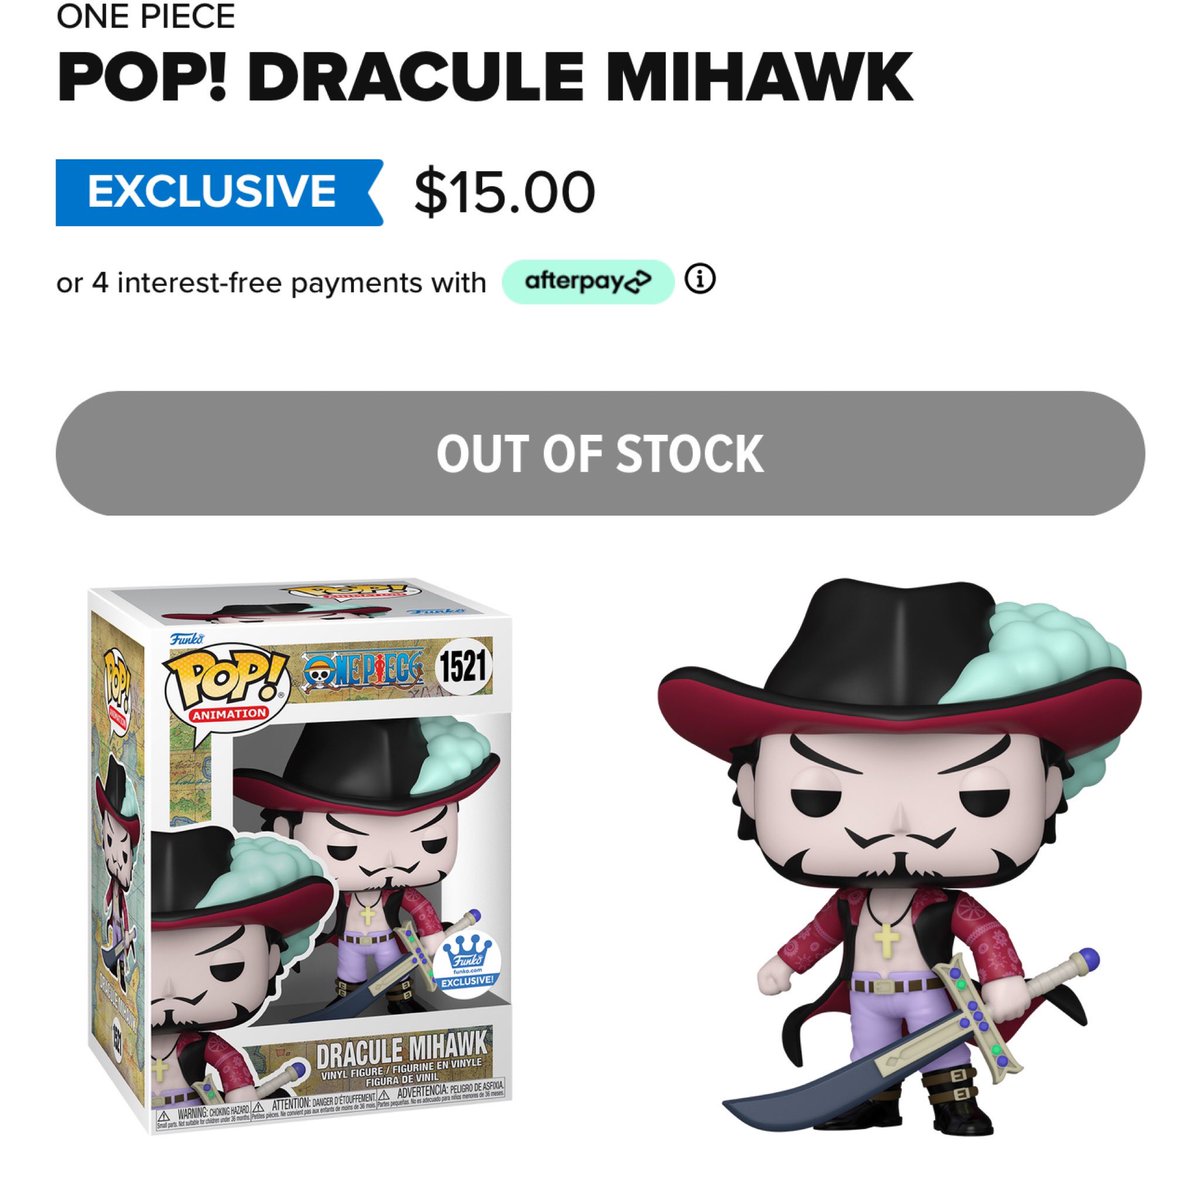 Dracule Mihawk is out of stock! I hope you got one if you wanted one. . #OnePiece #Funko #FunkoPop #FunkoPopVinyl #Pop #PopVinyl #Collectibles #Collectible #FunkoCollector #FunkoPops #Collector #Toy #Toys #DisTrackers